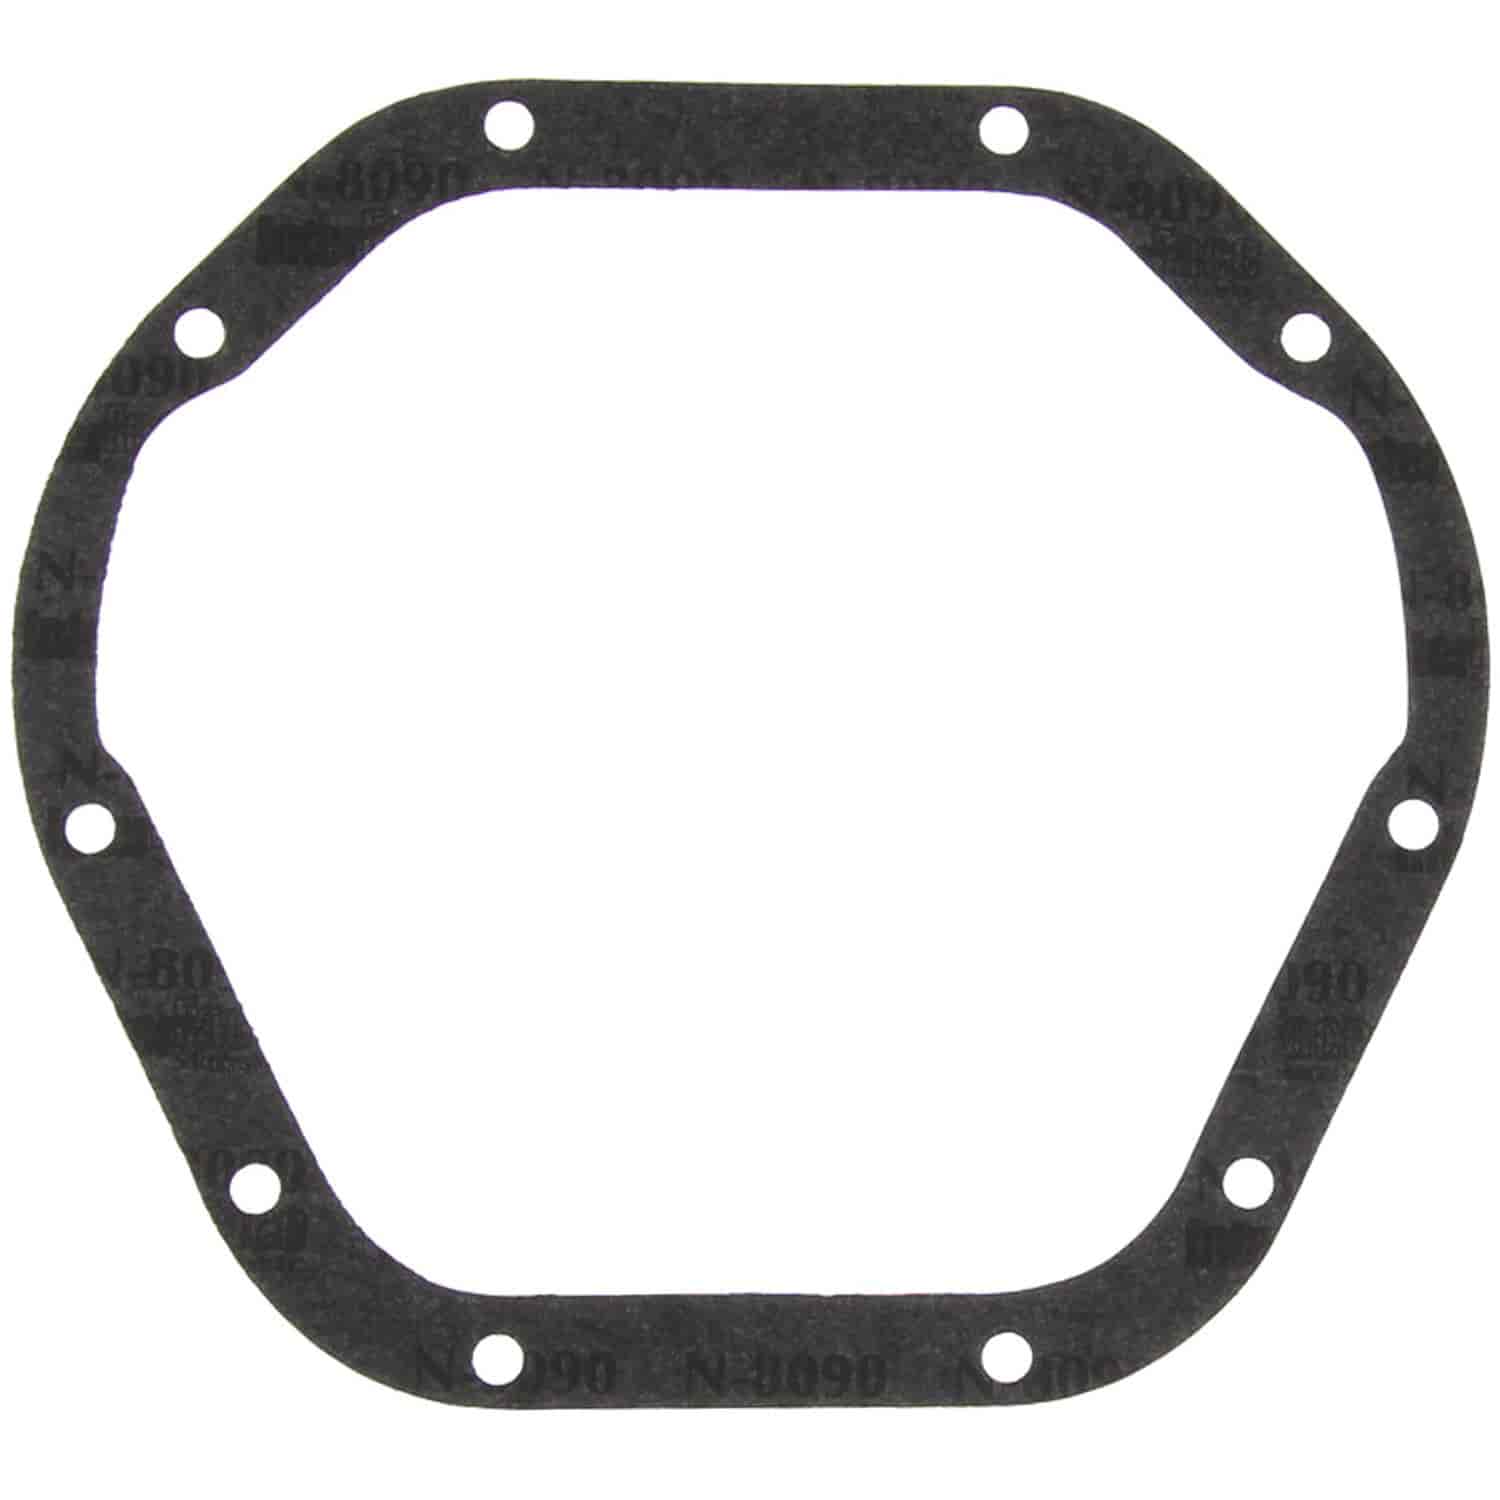 Axle Housing Cover Gasket 1963-2006 Chevy/Dodge/Ford/GMC/International/Jeep/Plymouth with Dana 44